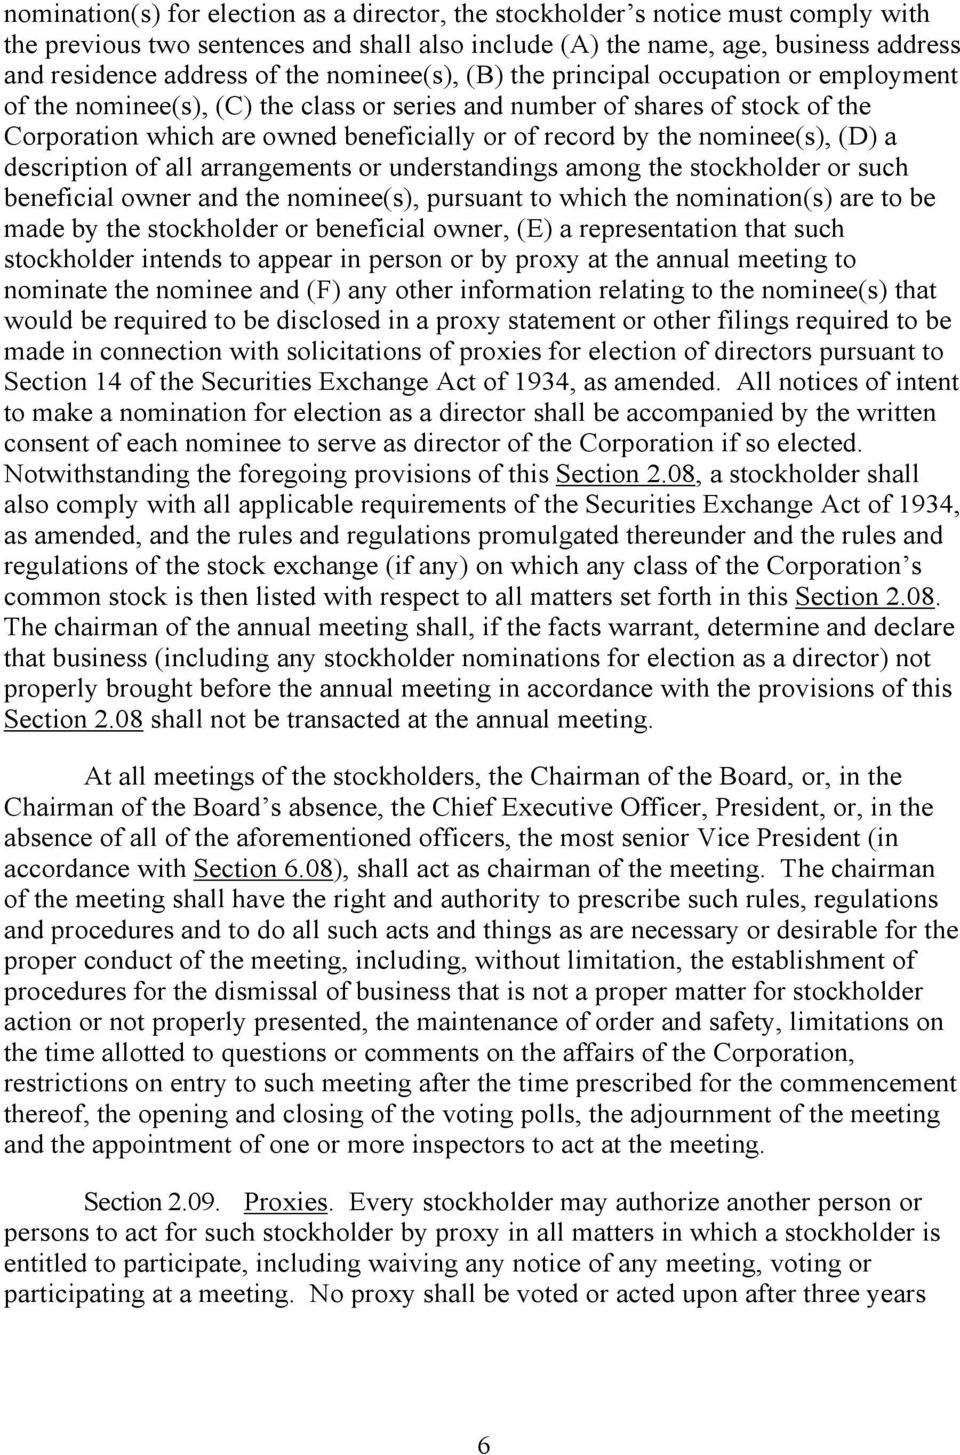 nominee(s), (D) a description of all arrangements or understandings among the stockholder or such beneficial owner and the nominee(s), pursuant to which the nomination(s) are to be made by the